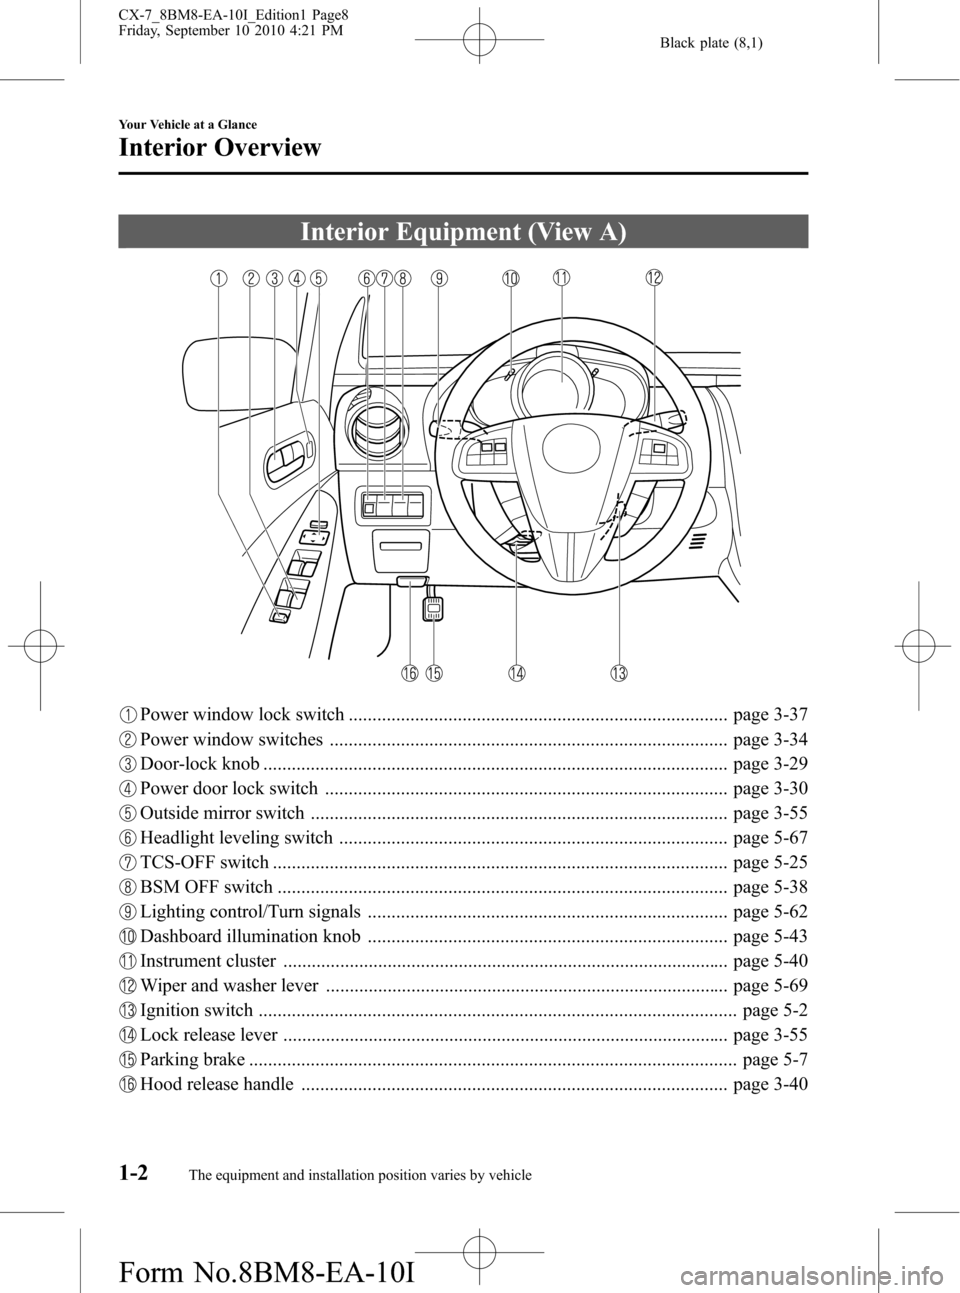 MAZDA MODEL CX-7 2011  Owners Manual (in English) Black plate (8,1)
Interior Equipment (View A)
Power window lock switch ................................................................................ page 3-37
Power window switches ................